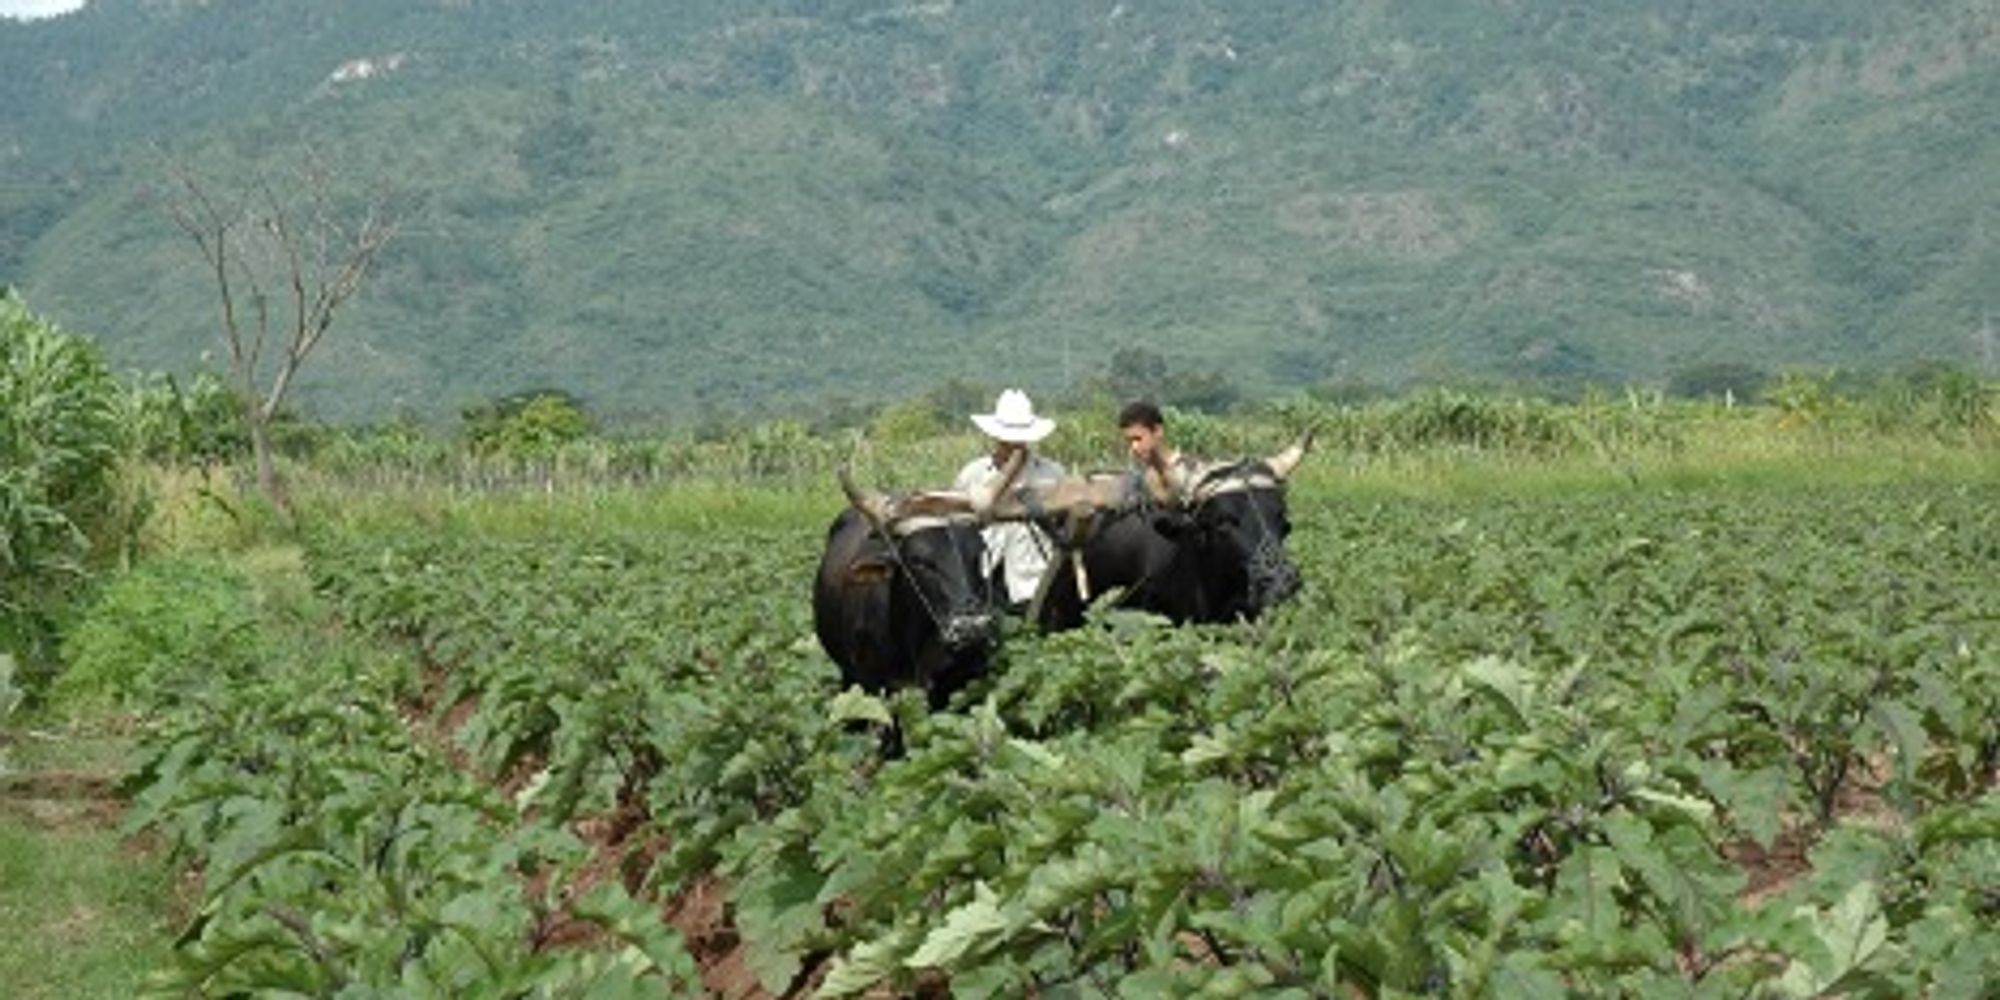 Chinese eggplant being cultivated in Honduras